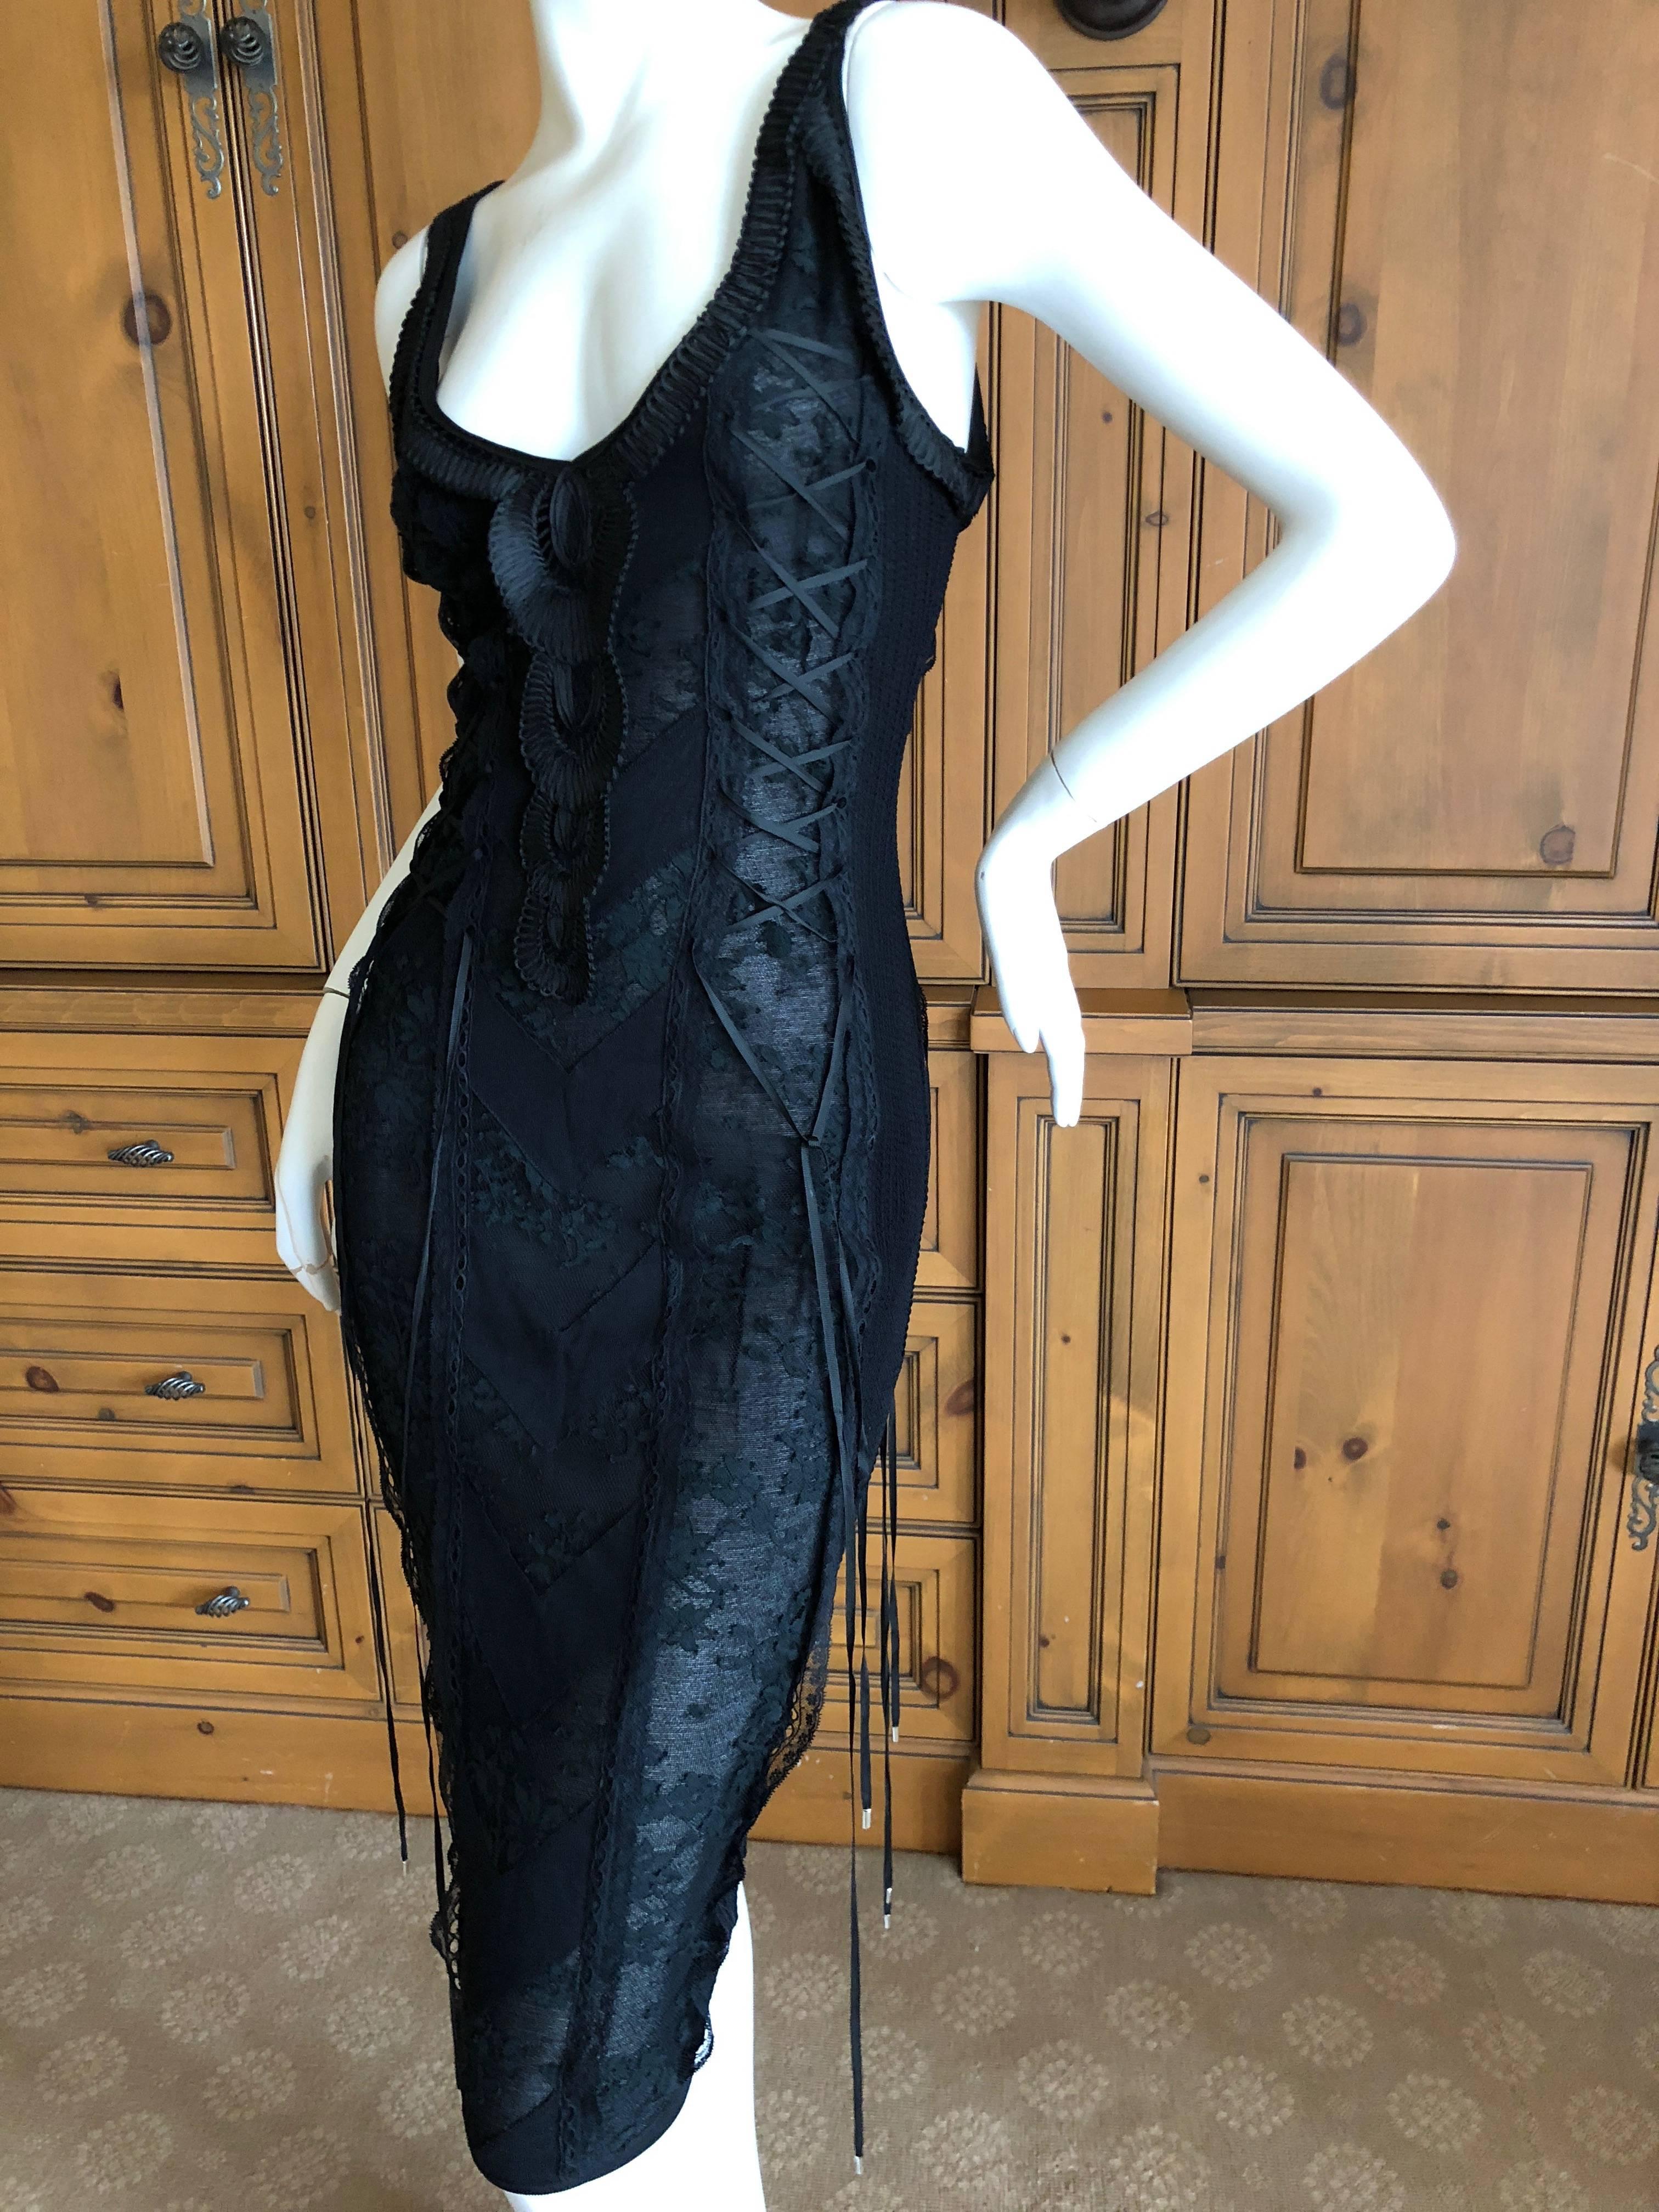 
Christian Dior John Galliano sheer lace chevron dress with corset lacing up the sides and back.
Trimmed with soutache.
There is an underlining so it isn't totally sheer, would be fun to remove the lining.
 Size 38 
Bust 36